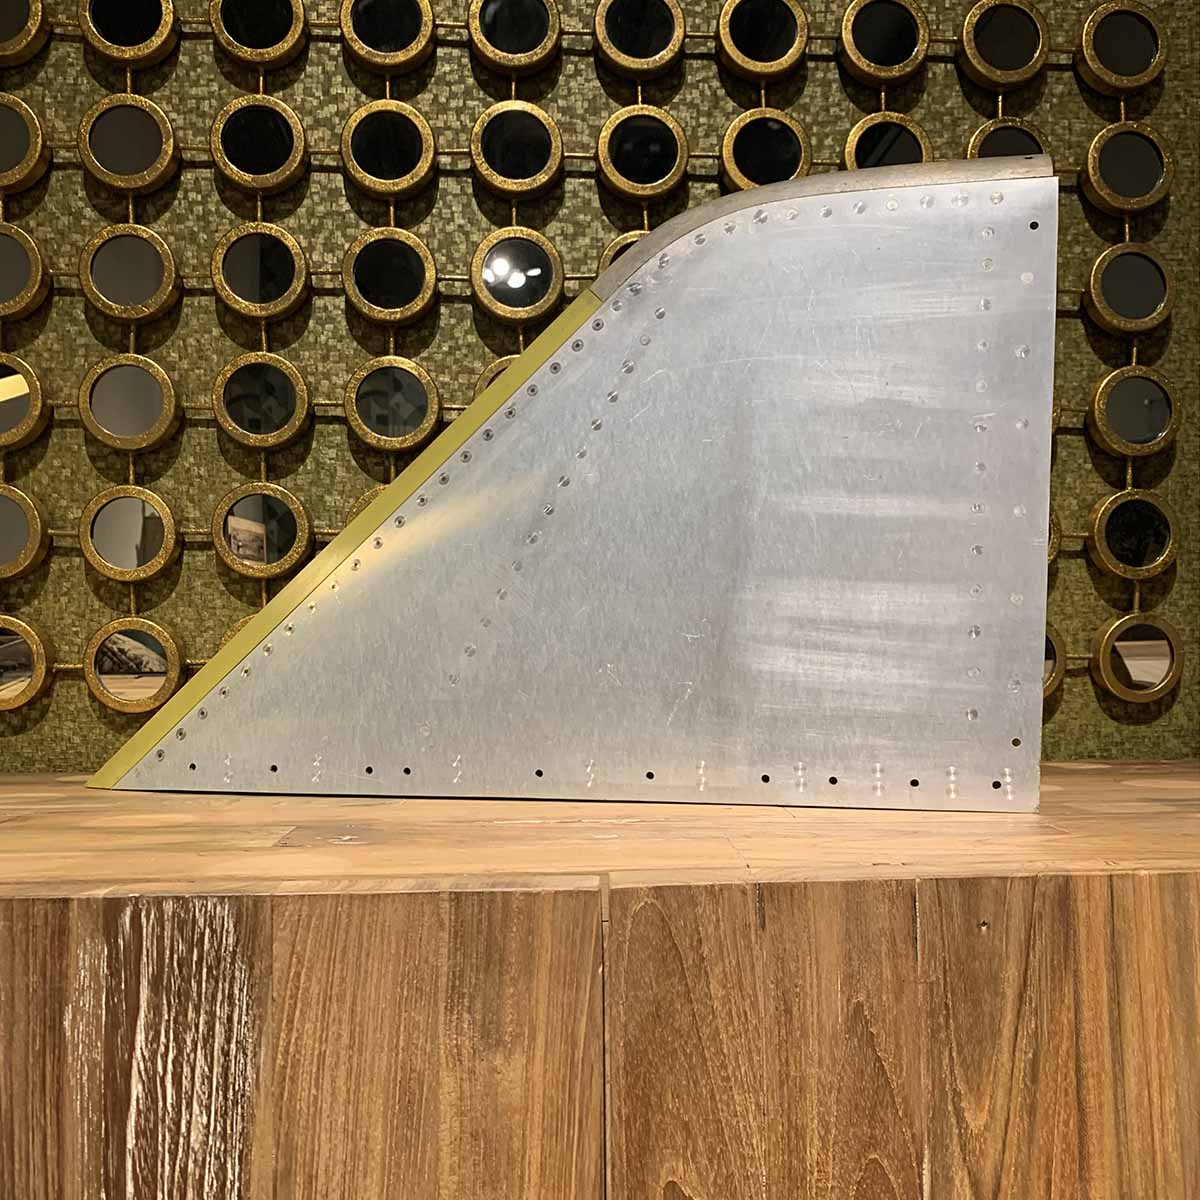 Forward part of the fin-tip of a Lockheed F-104G Starfighter for sale.